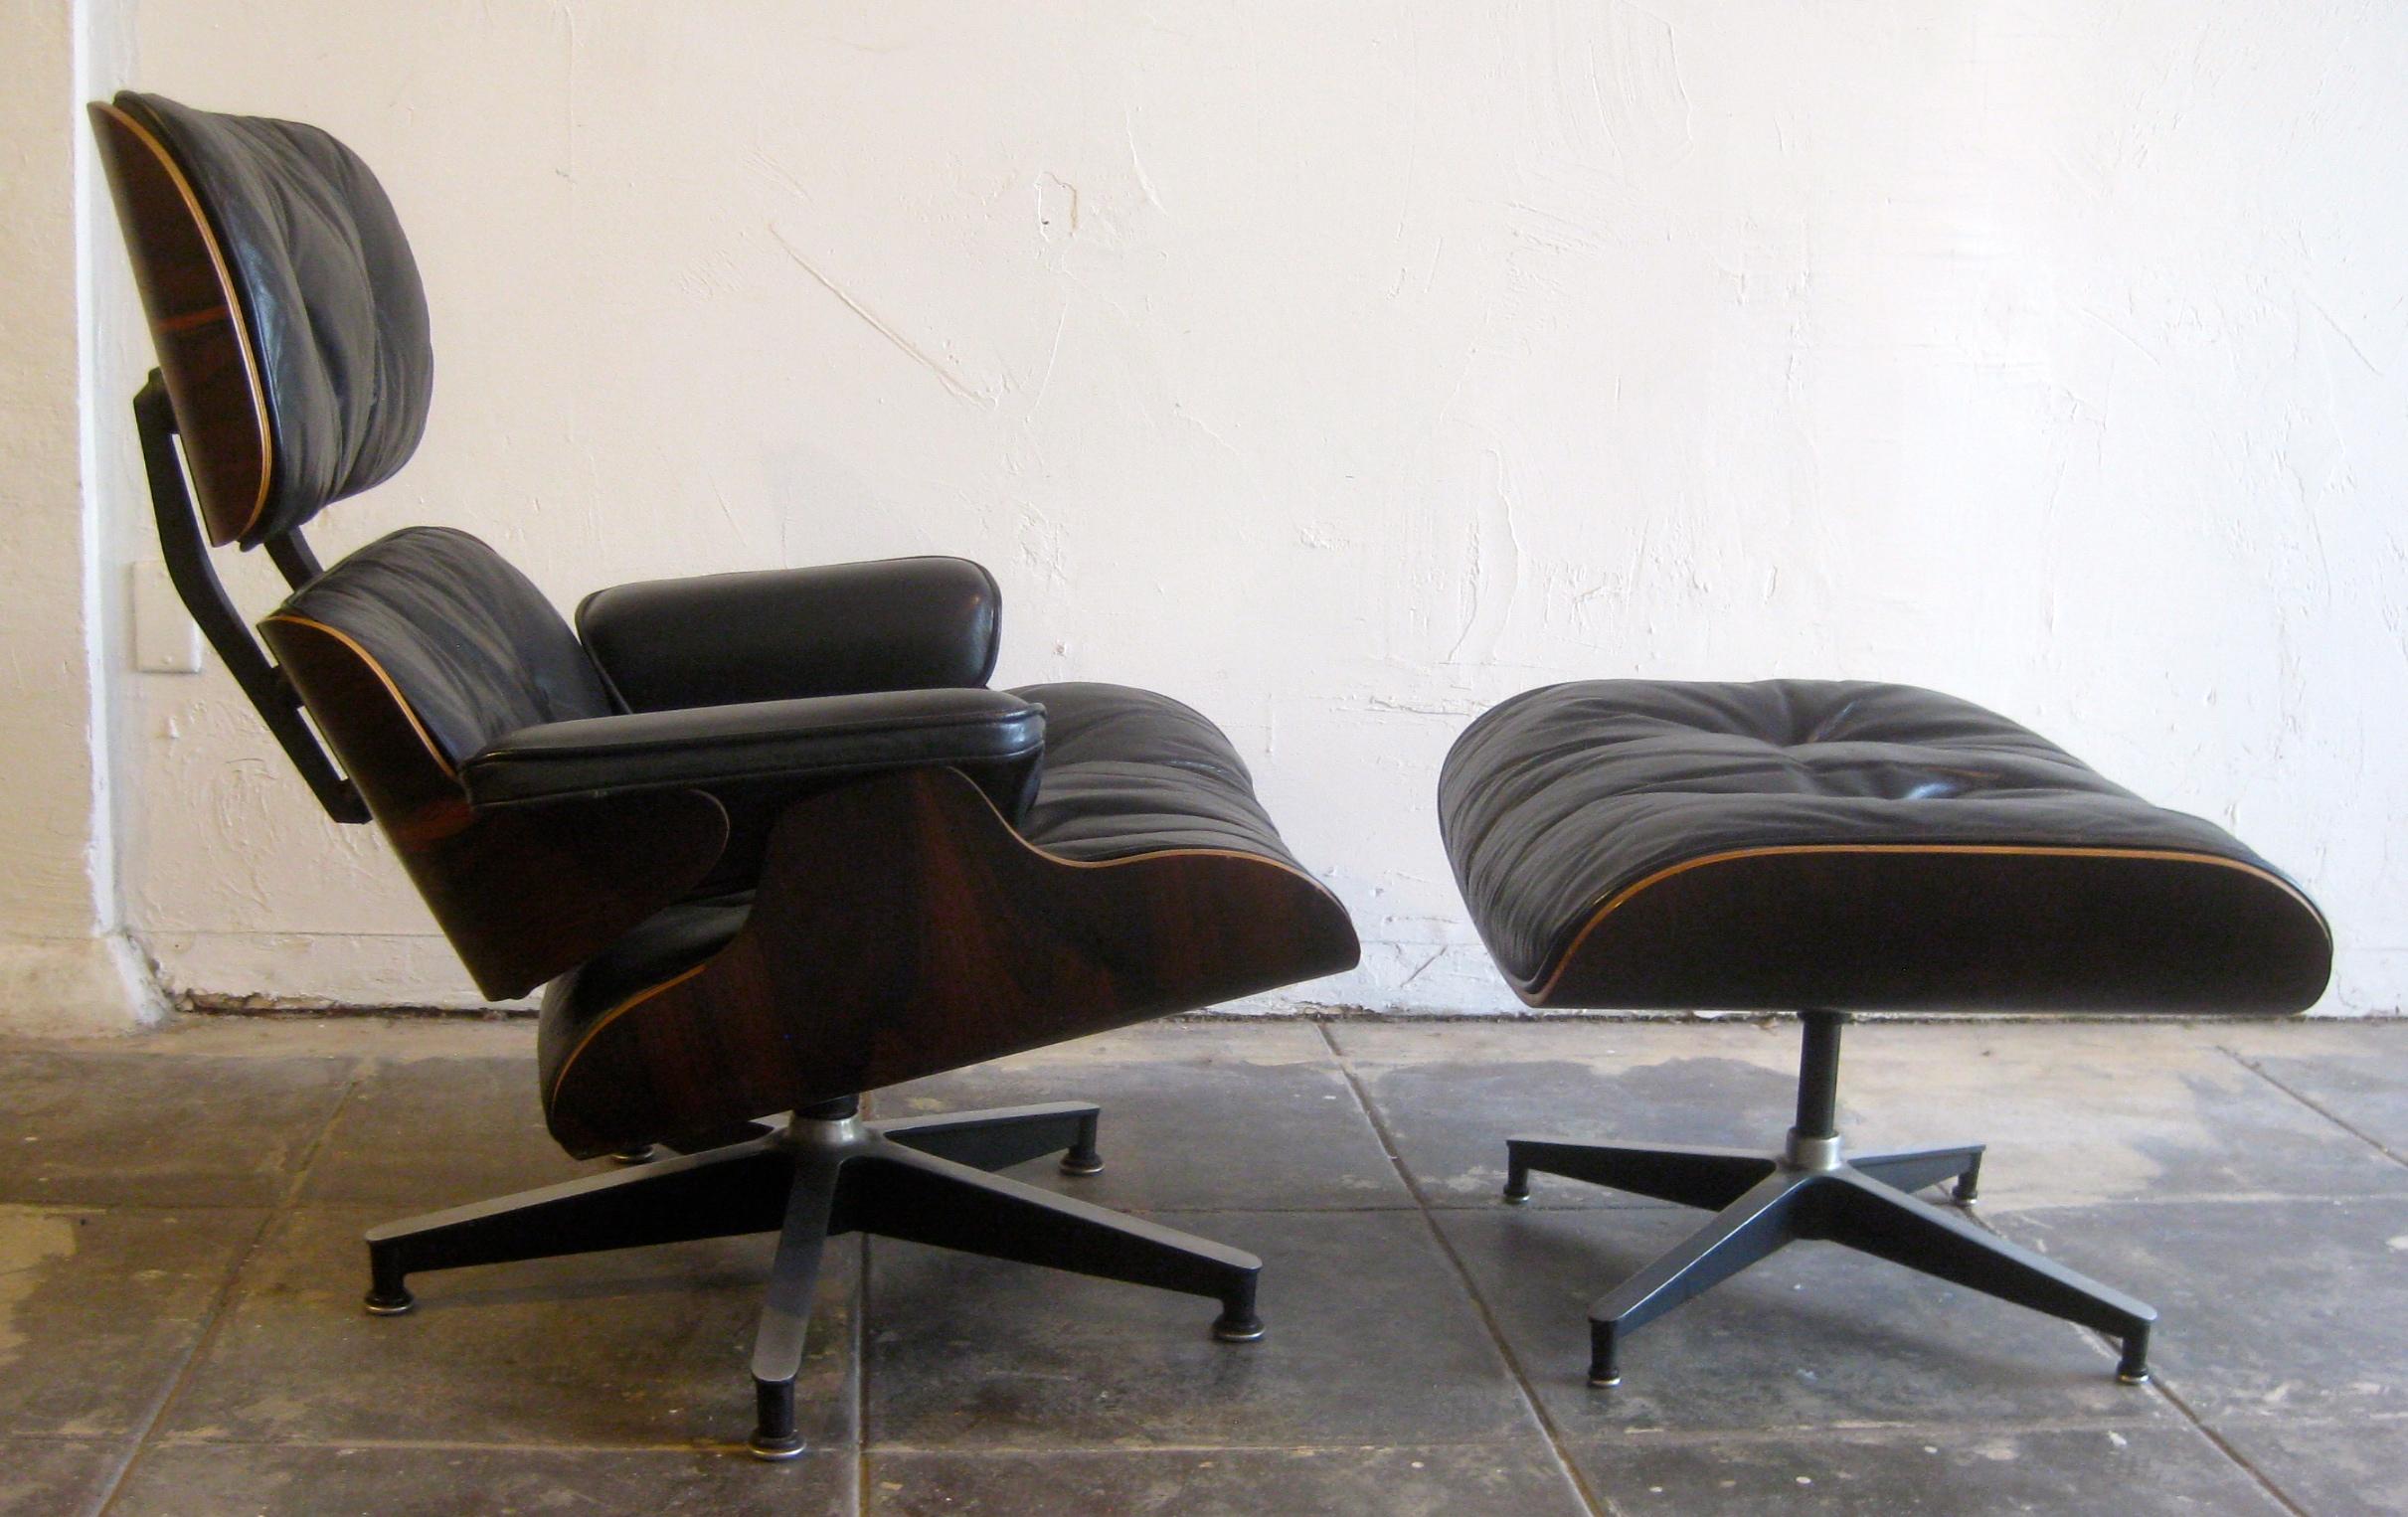 North American 1960s Charles Eames Herman Miller 670 Rosewood Lounge Chair and 671 Ottoman